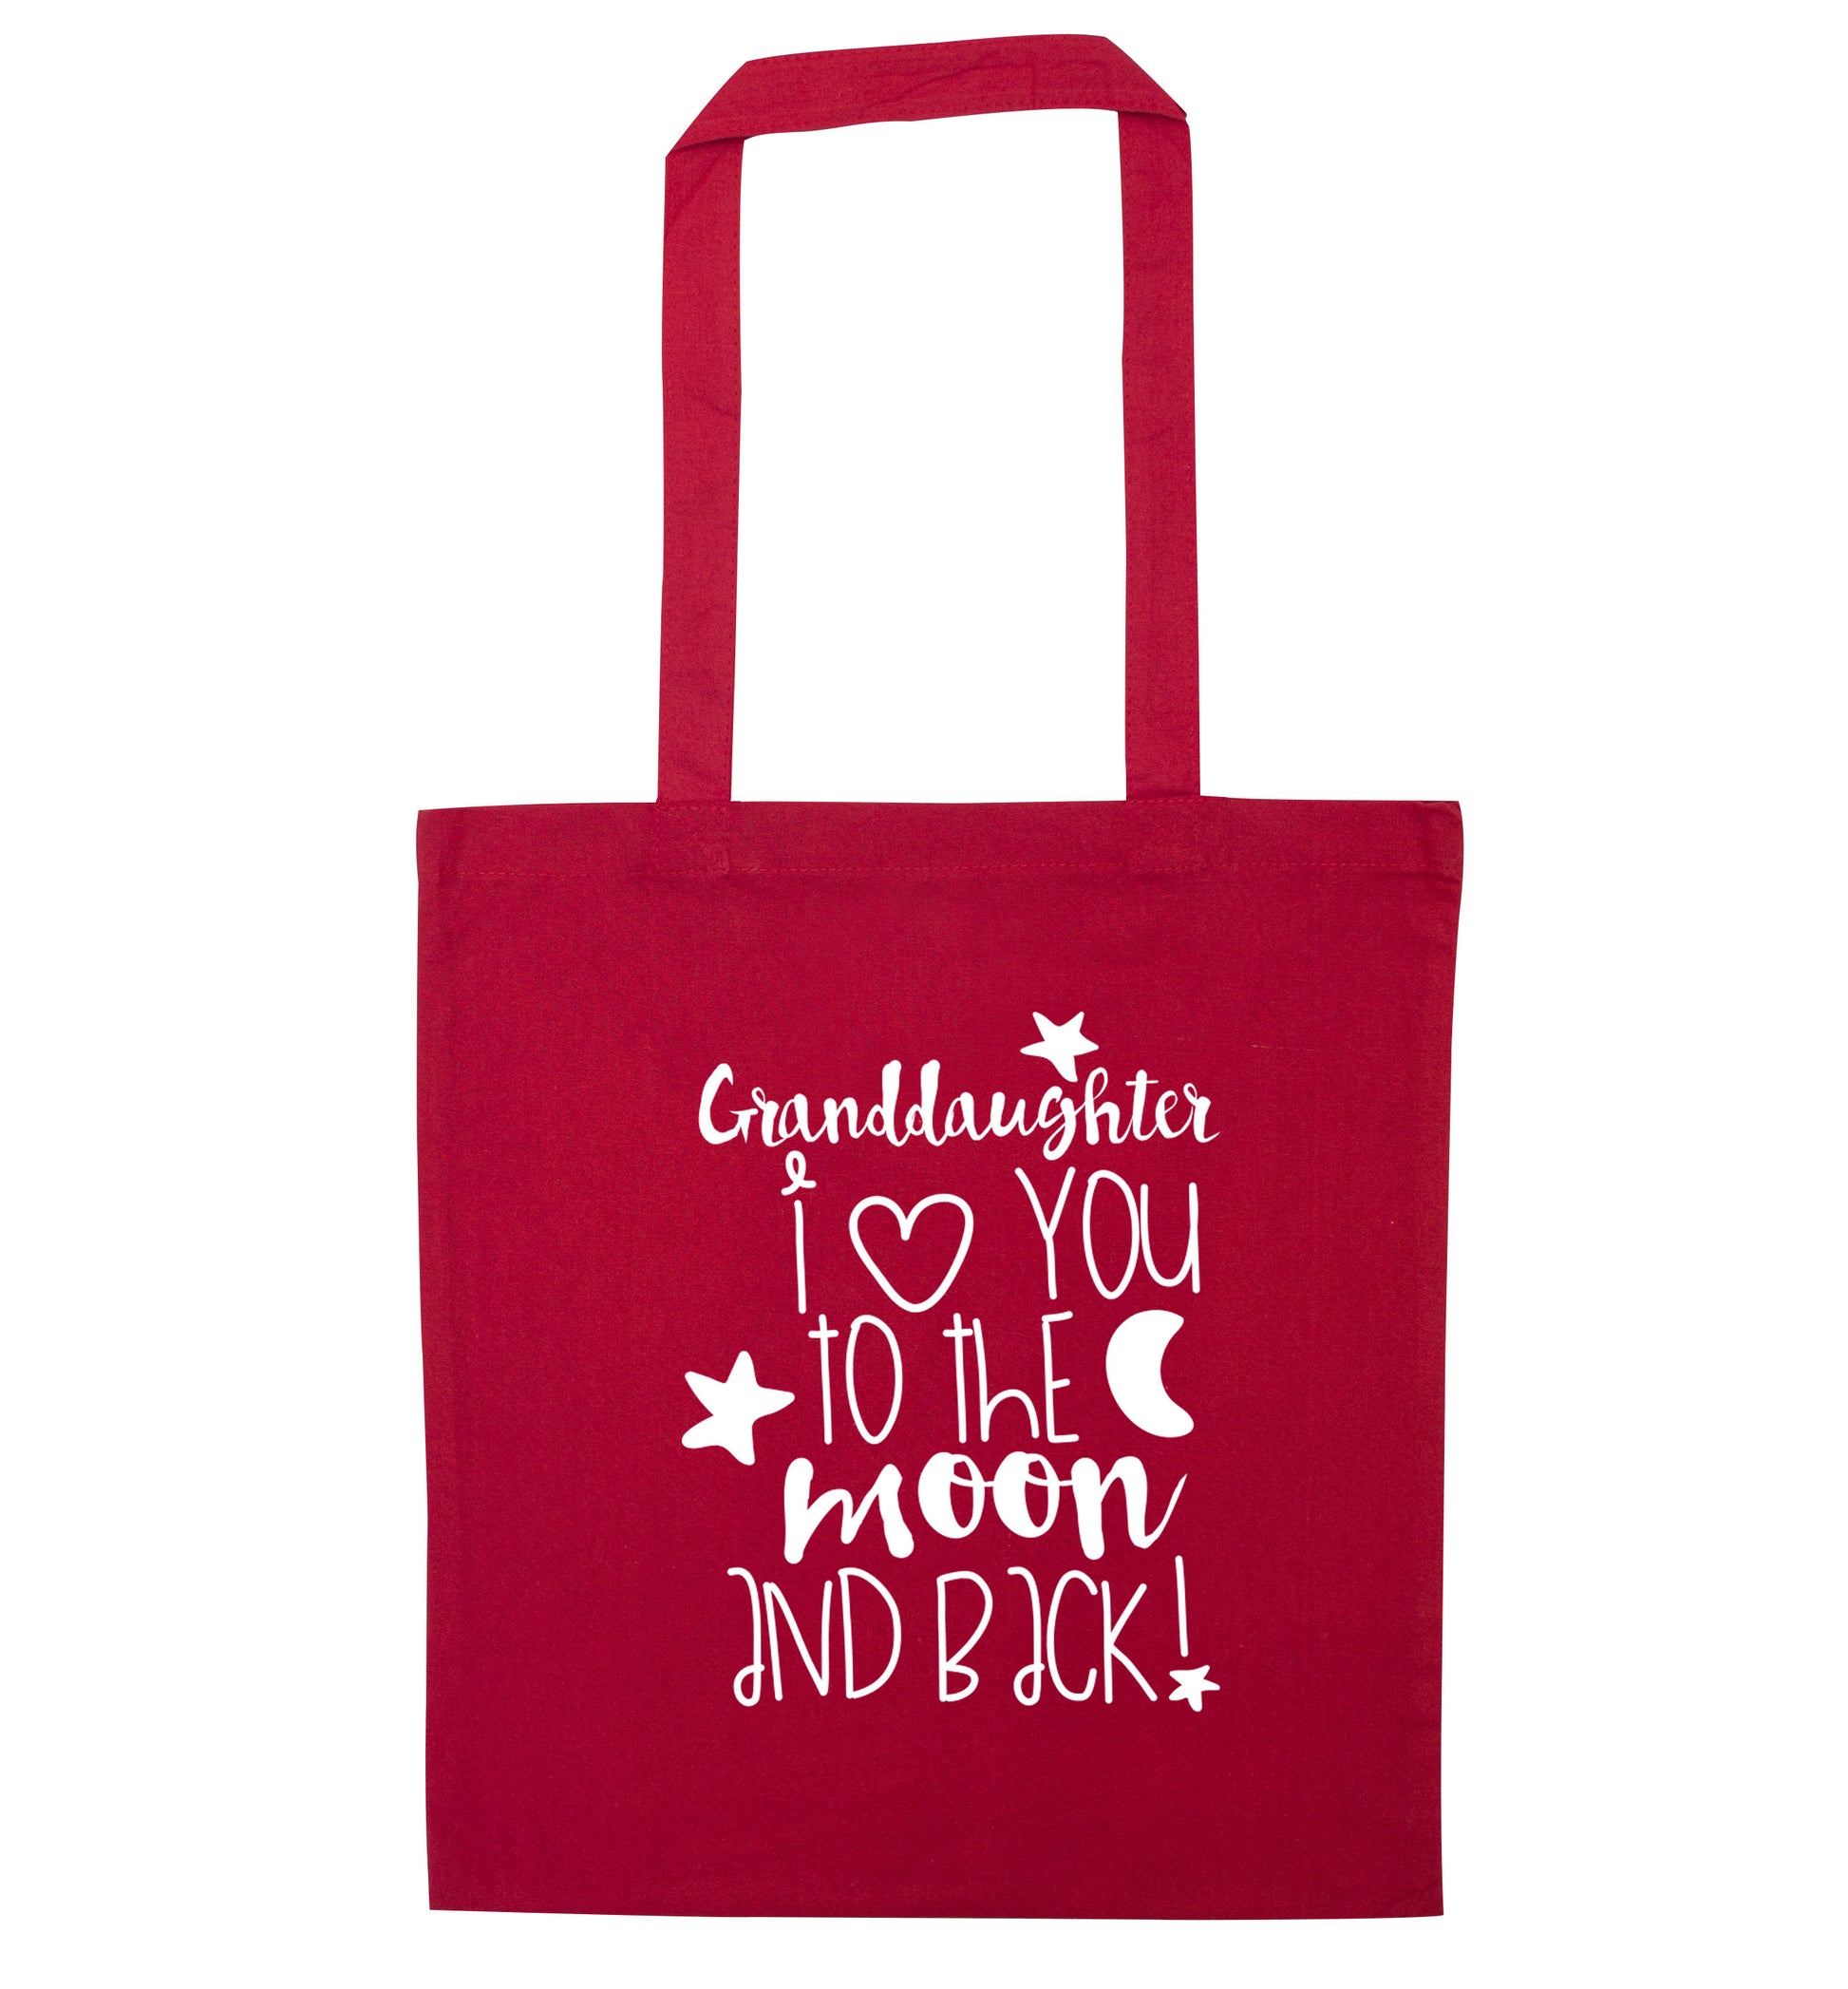 Granddaughter I love you to the moon and back red tote bag